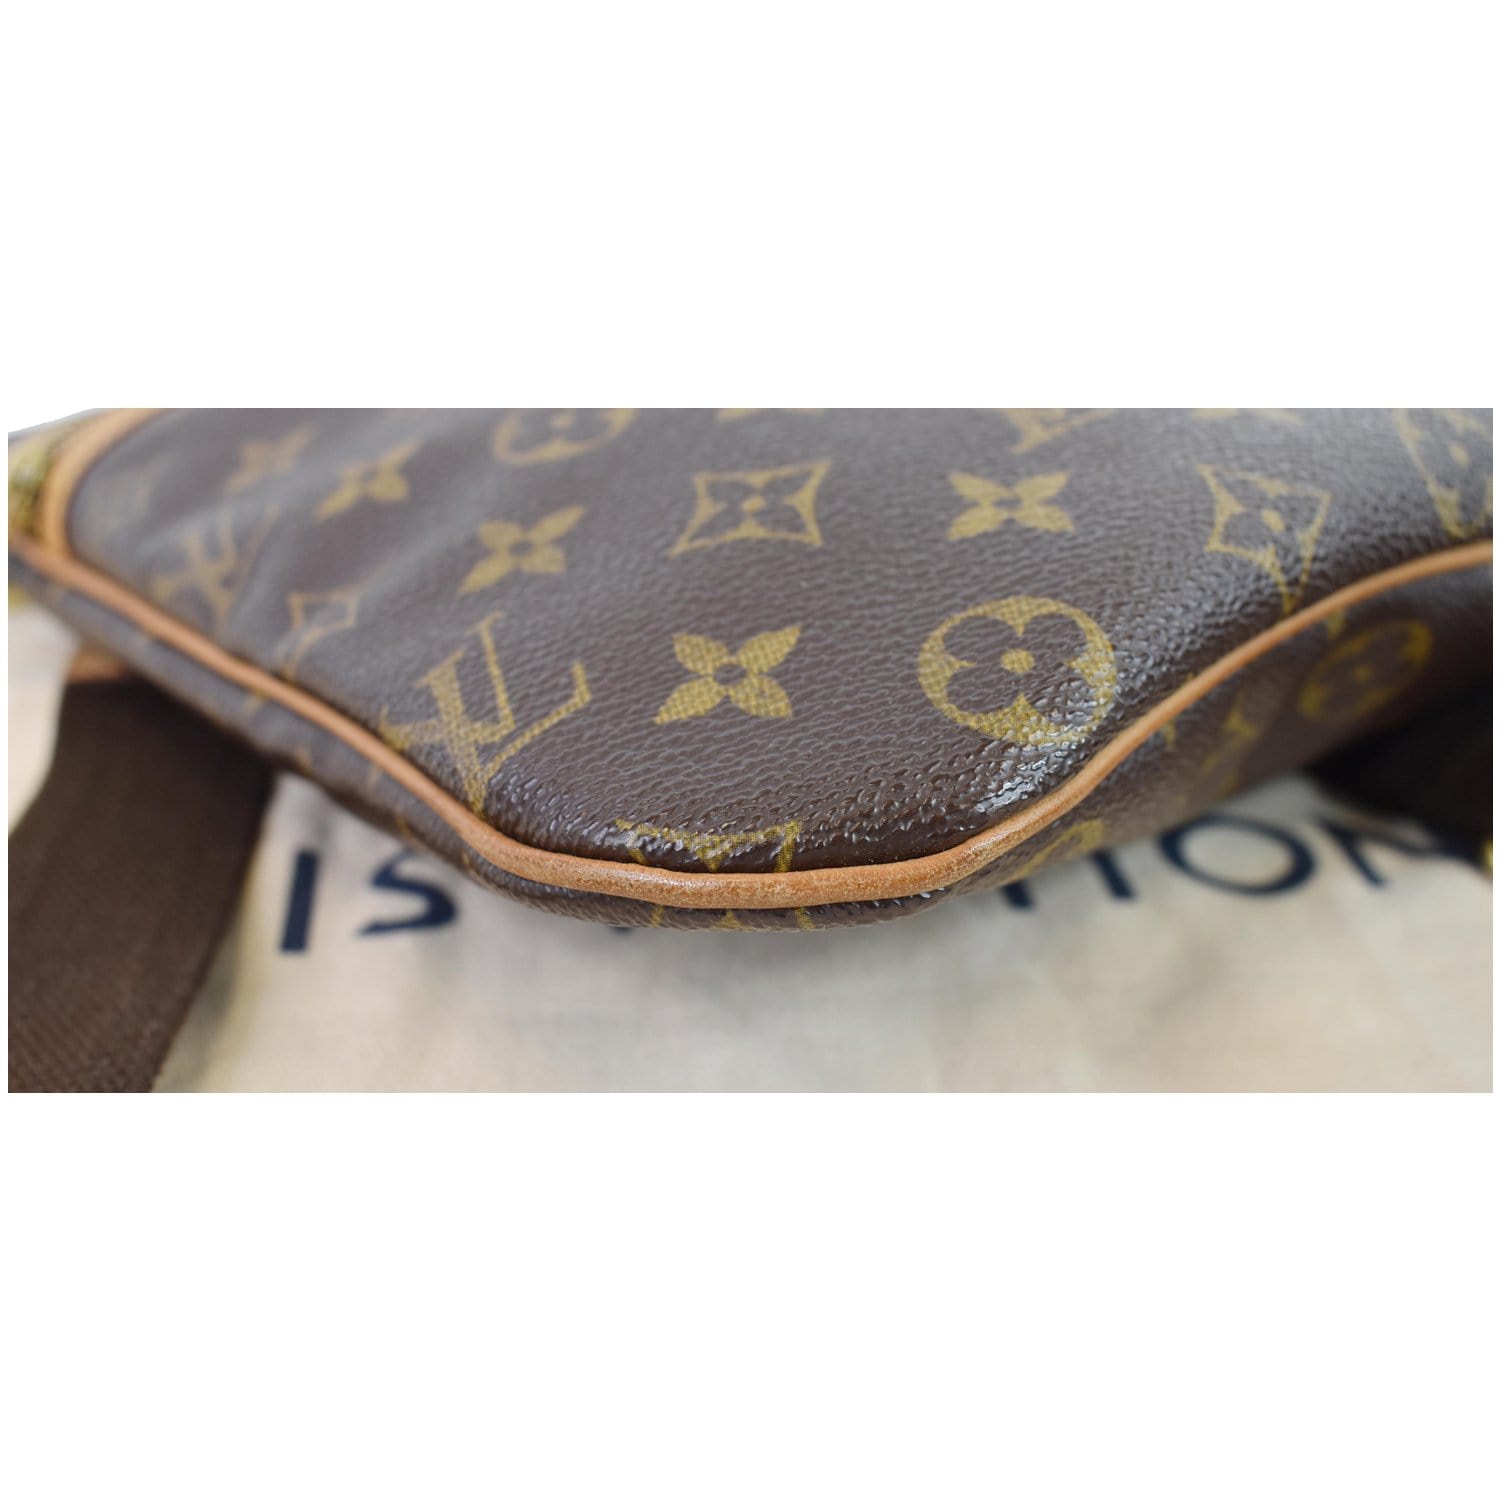 LOUIS VUITTON SAC BOSPHORE/BRIEFCASE, monogram canvas with brass hardware,  adjustable fabric shoulder strap, top zip pocket, two top handles, fabric  lining, front external zip pocket with dust bag, 34cm x 8cm x